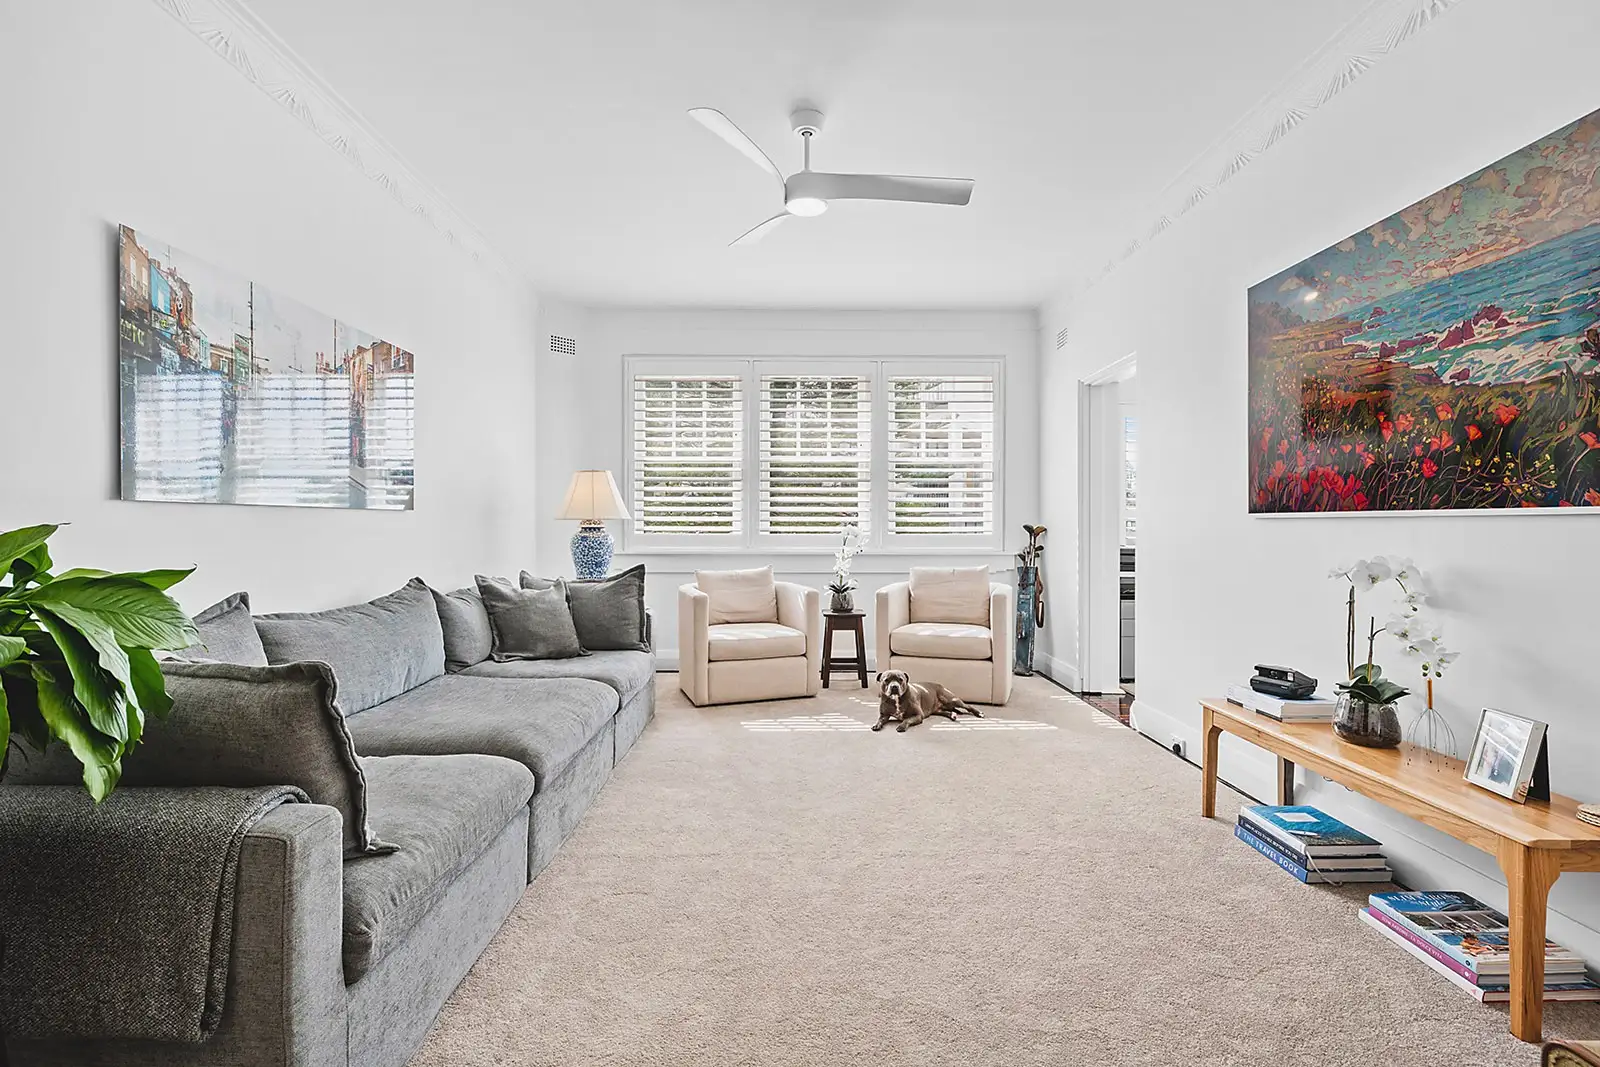 Photo #2: 4/1A Eastbourne Road, Darling Point - Sold by Sydney Sotheby's International Realty